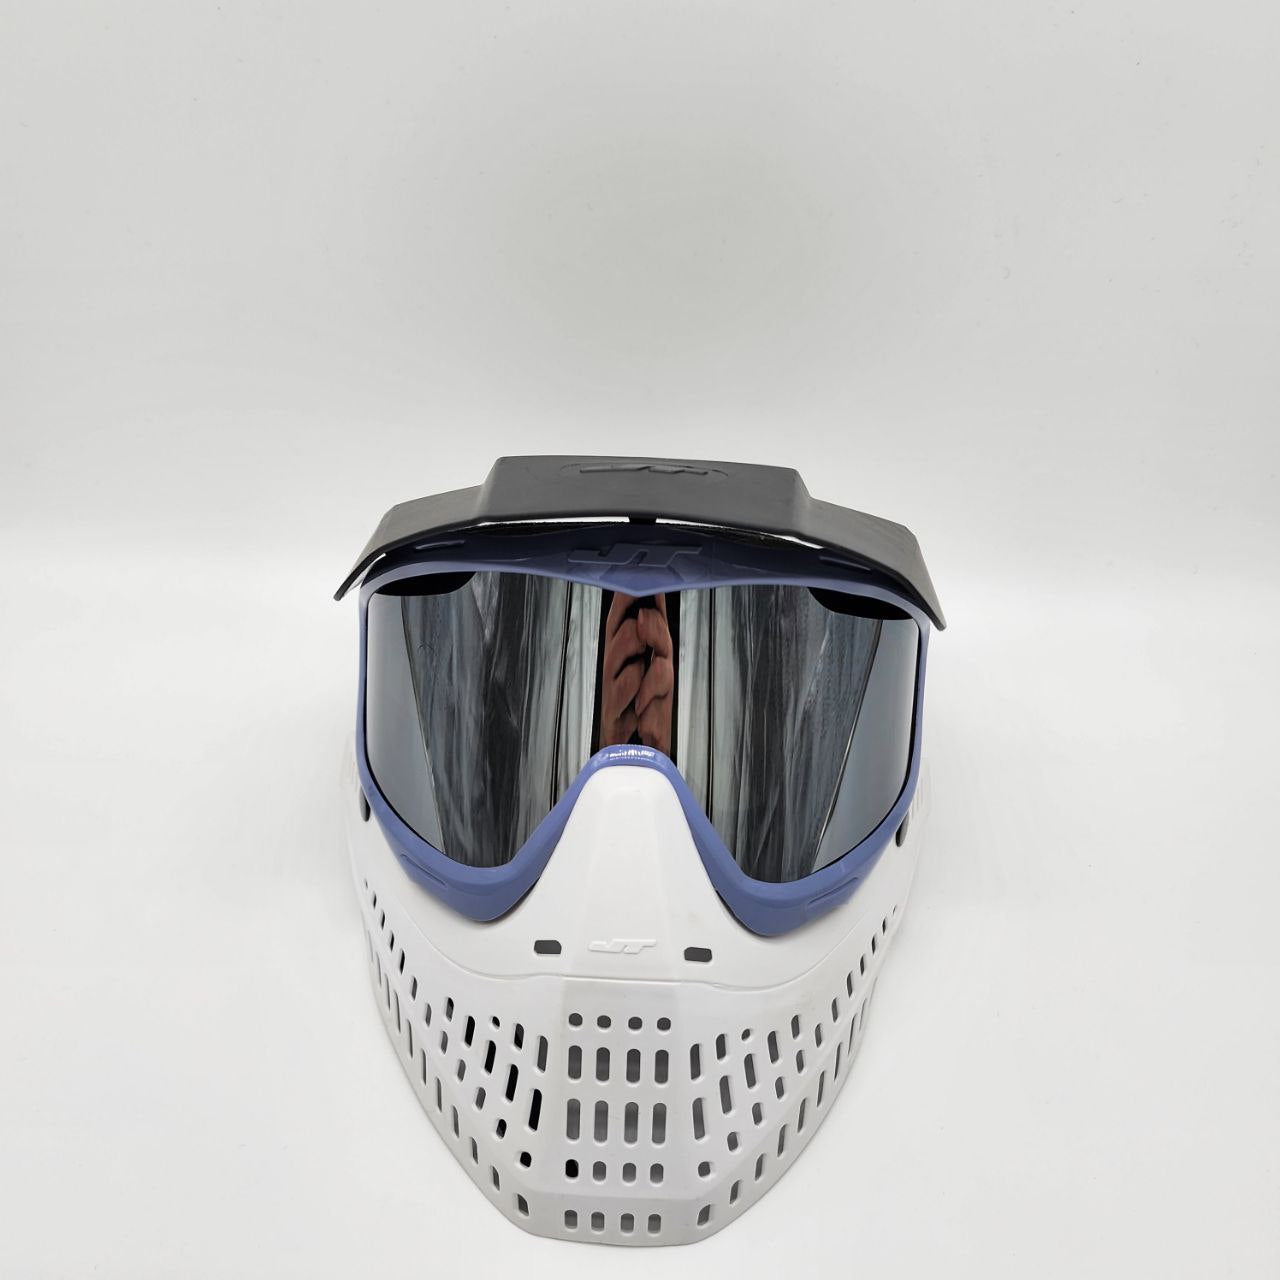 Jt Proflex Paintball Mask - Goggle | No Box Or Package